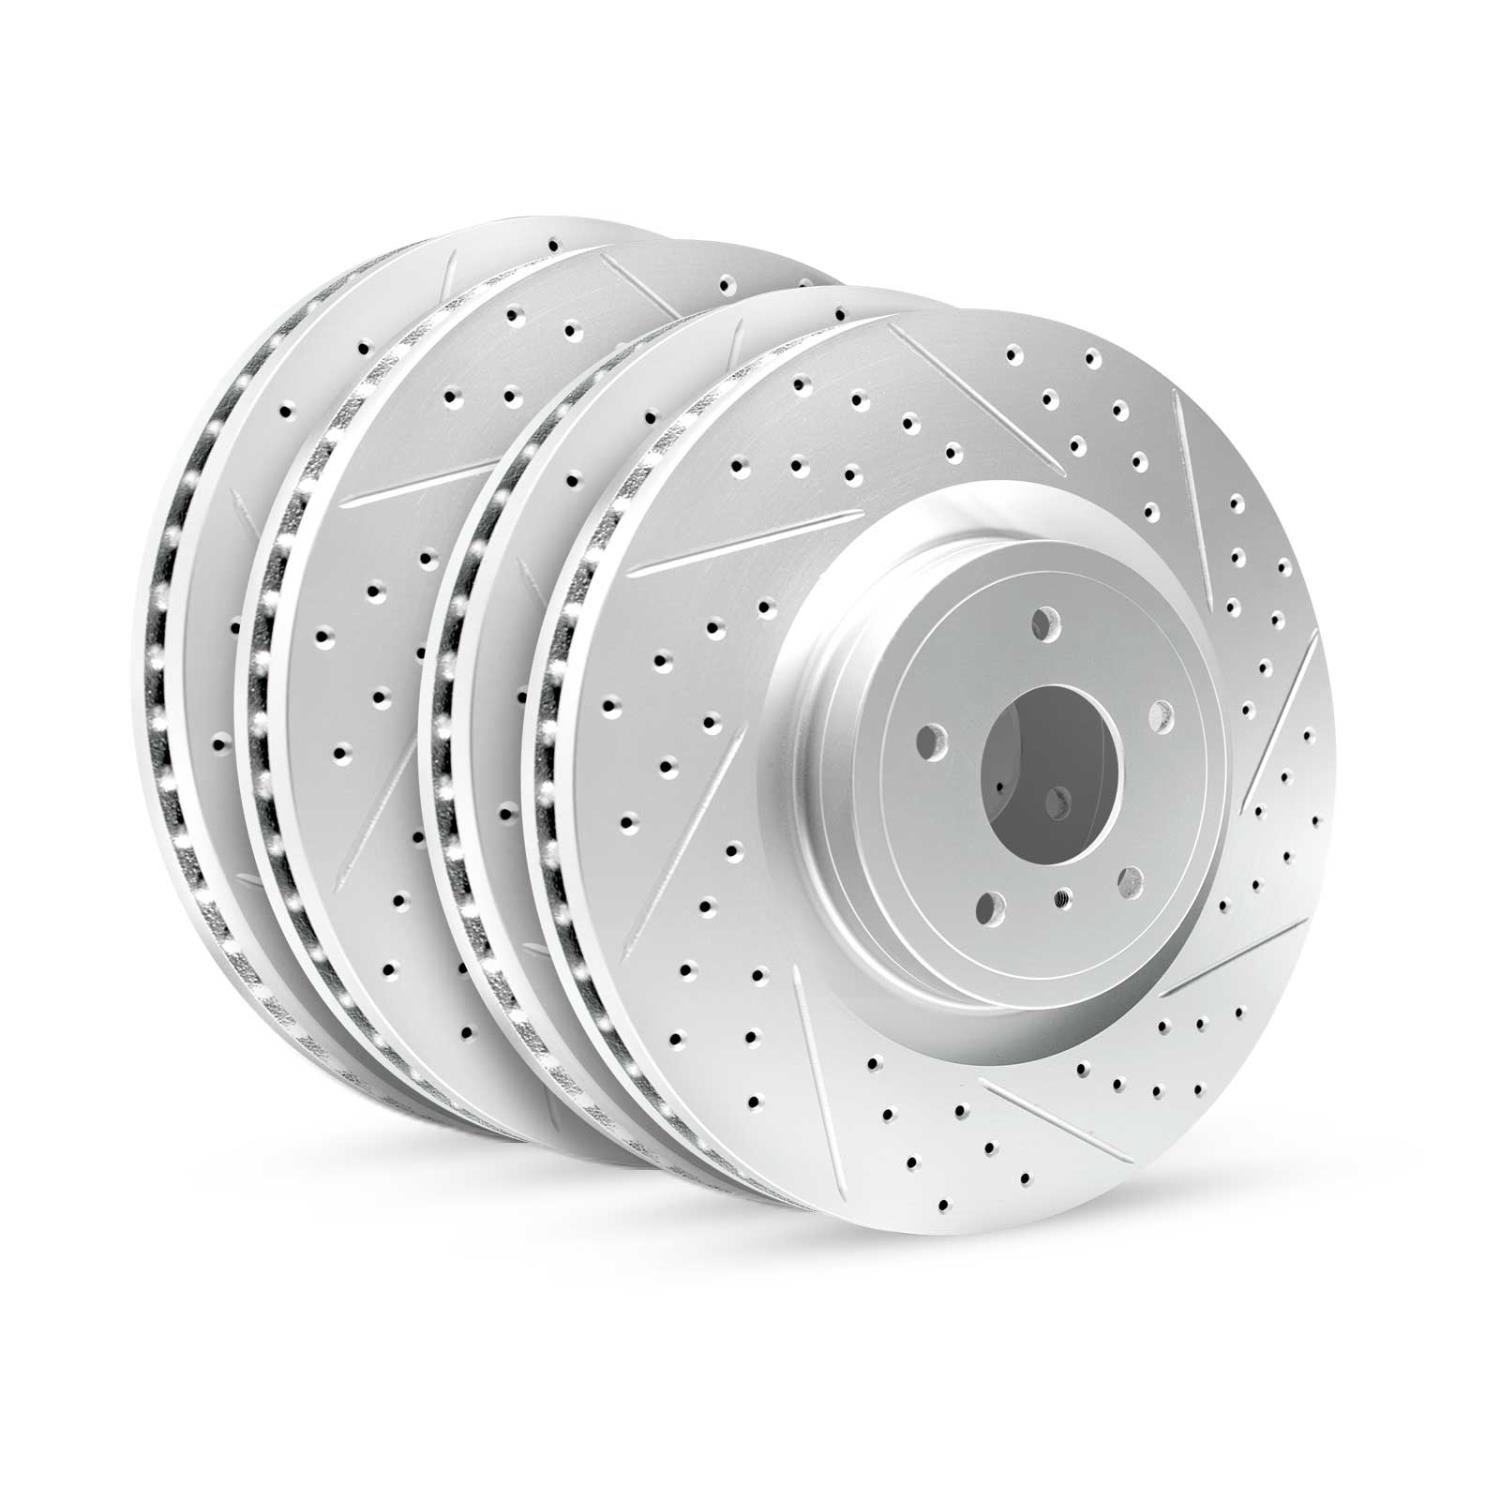 GEO-Carbon Drilled/Slotted Rotors, 2018-2021 Land Rover,